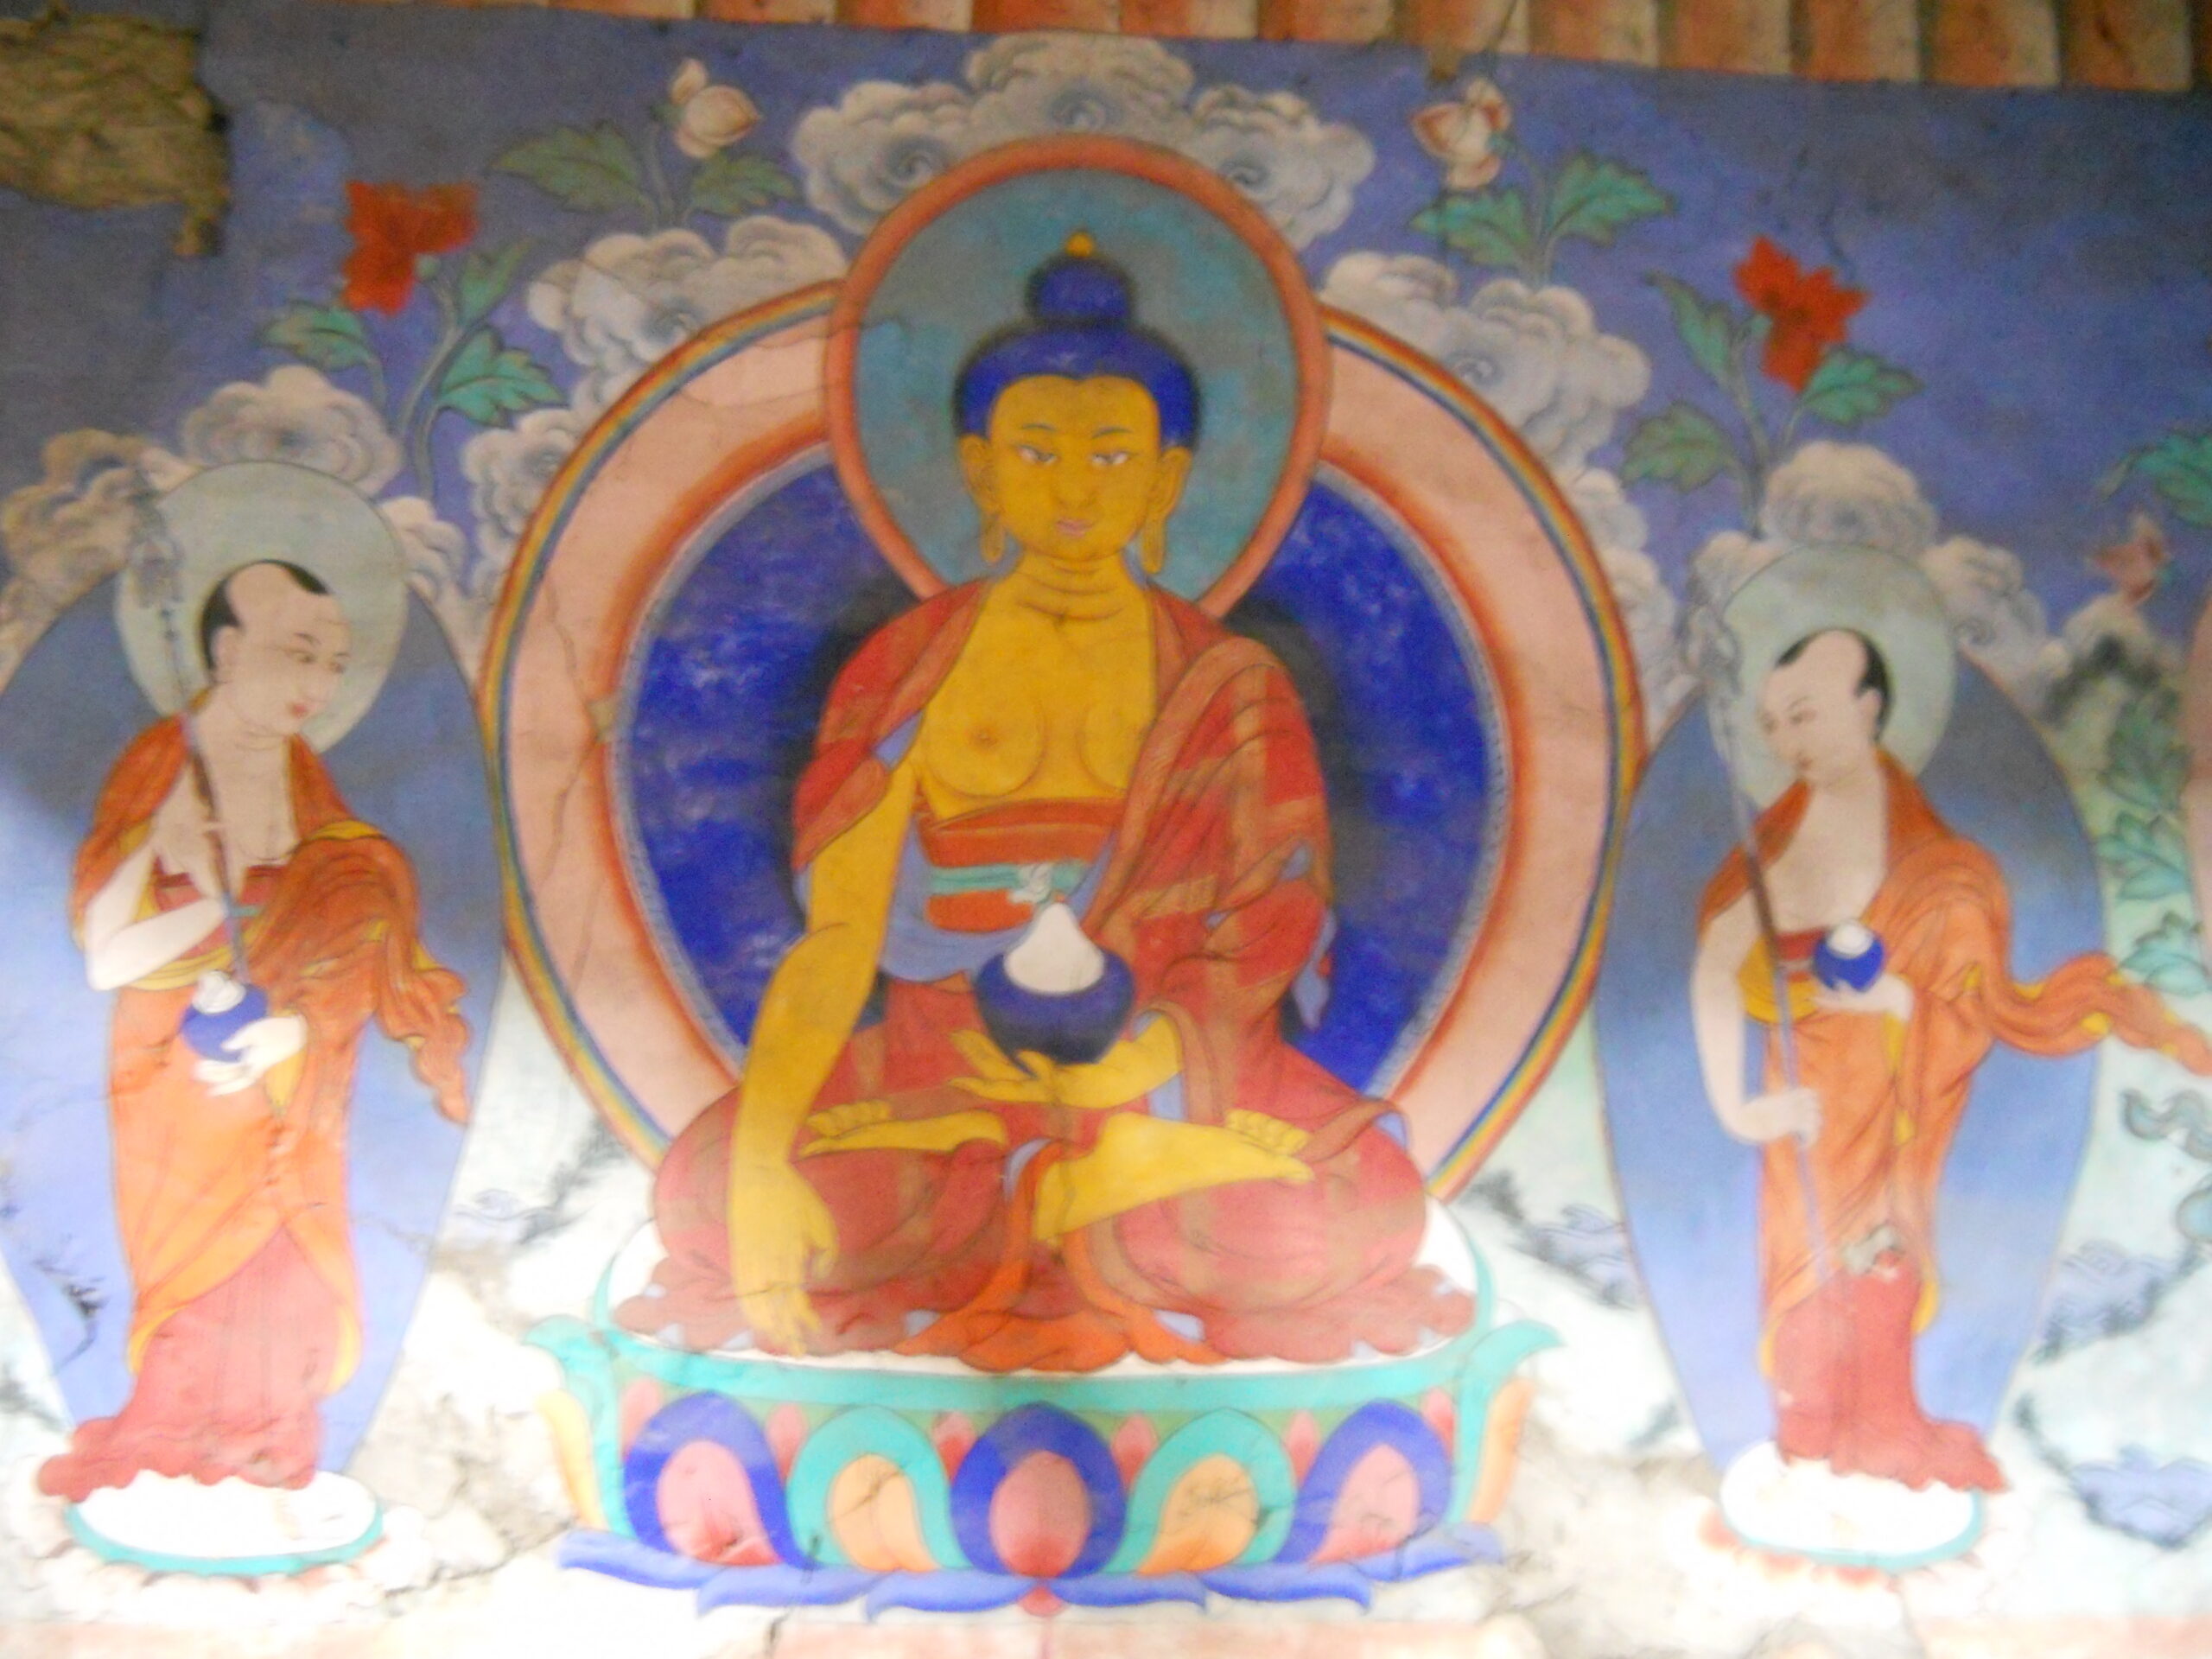 Ladakh: see thousands of original ancient buddhist murals with all characters, creatures -- plus galactic evidence of other life forms that were here